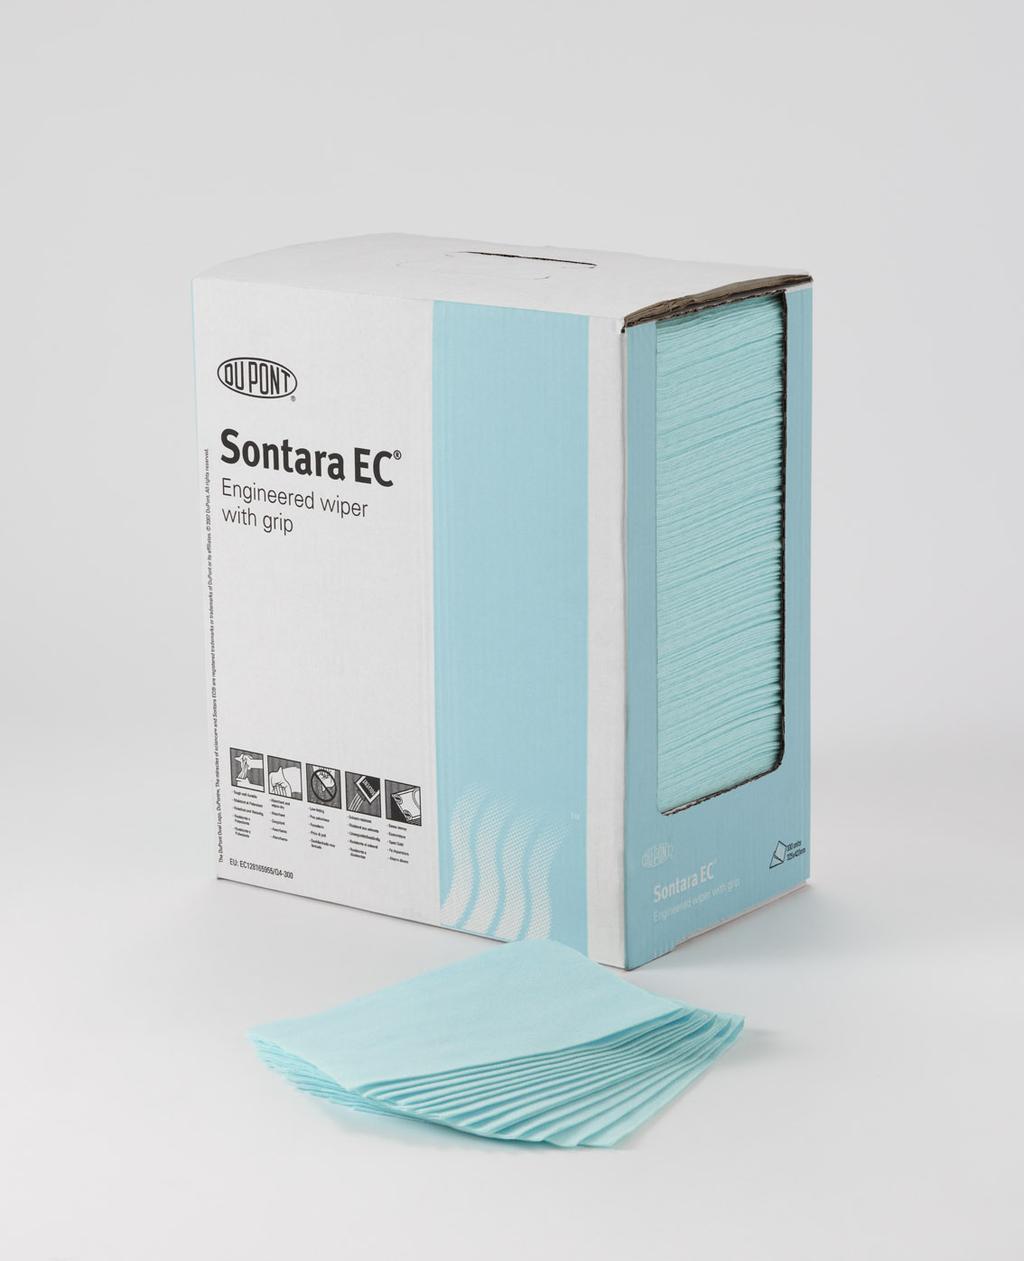 Food Contact Clearance Product code 2010 SONTARA EC - POP-UP D 1379 1230 Colour / Material Turquoise / Creped K947S Grams/m2 (gsm) 77 320mm x 420mm 250 wipes / carton 66 cartons / pallet SONTARA EC